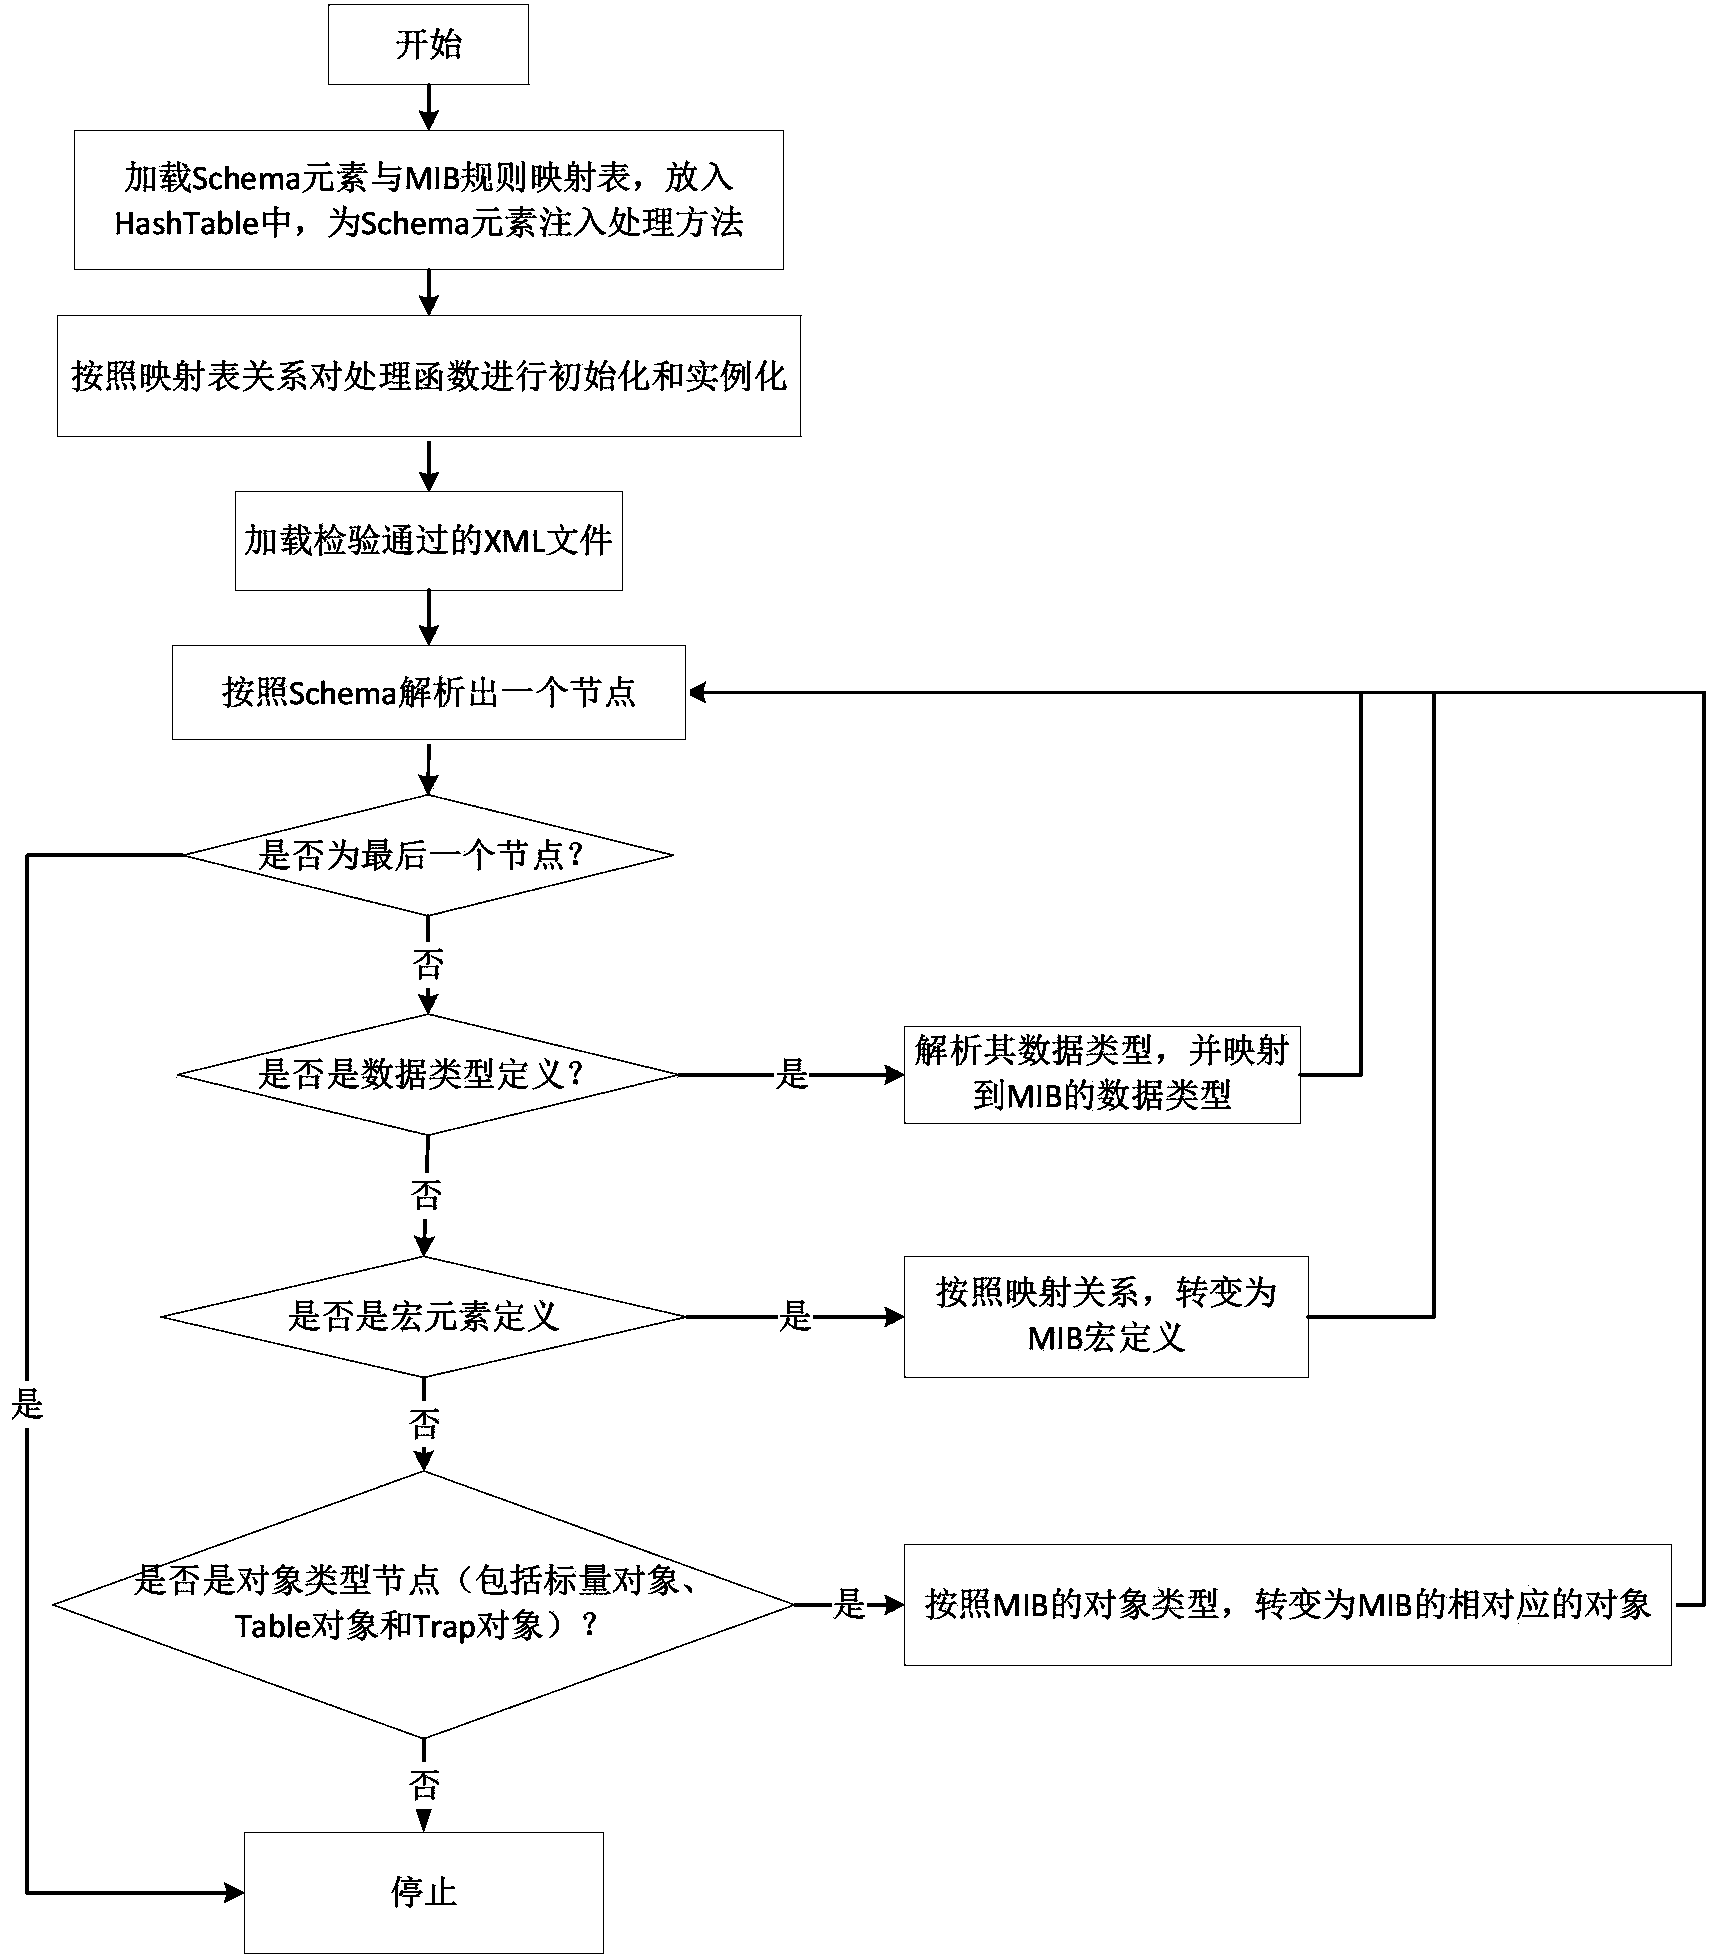 System and method for generating MIB files through XML files